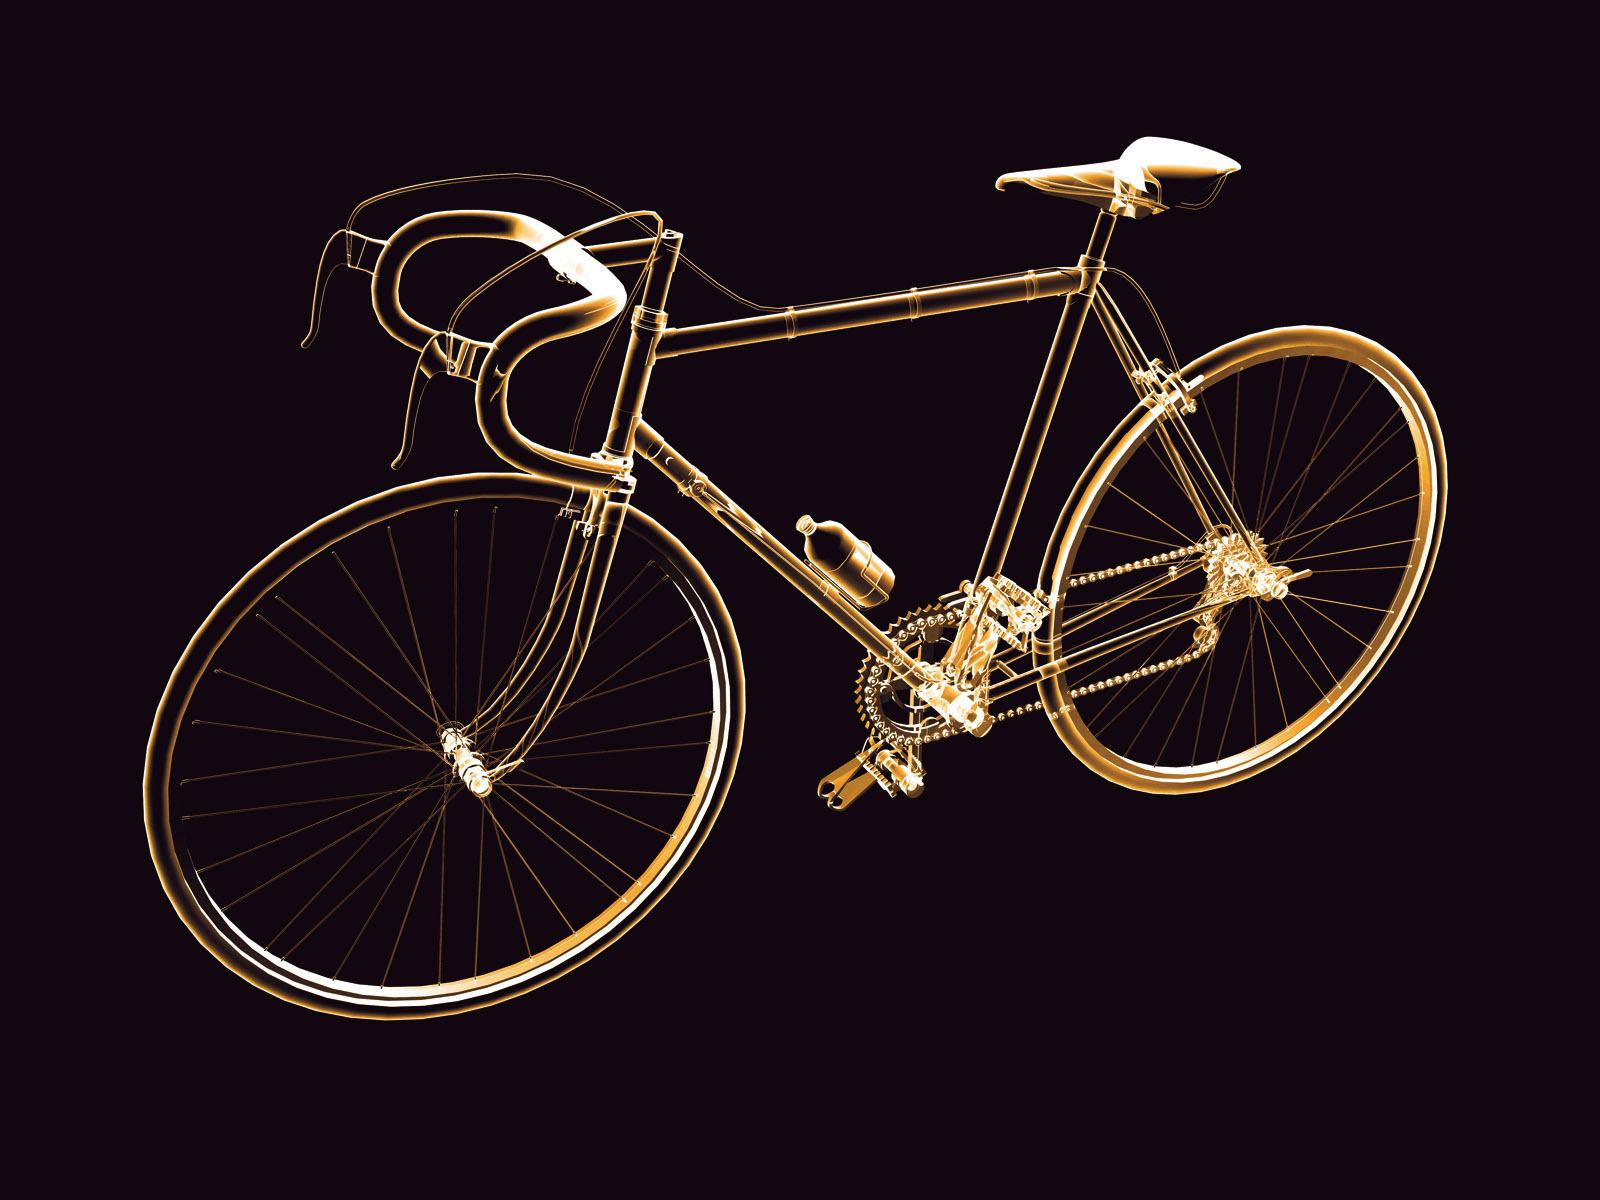 Neon Bicycle Desktop Pc And Mac Wallpaper Pictures